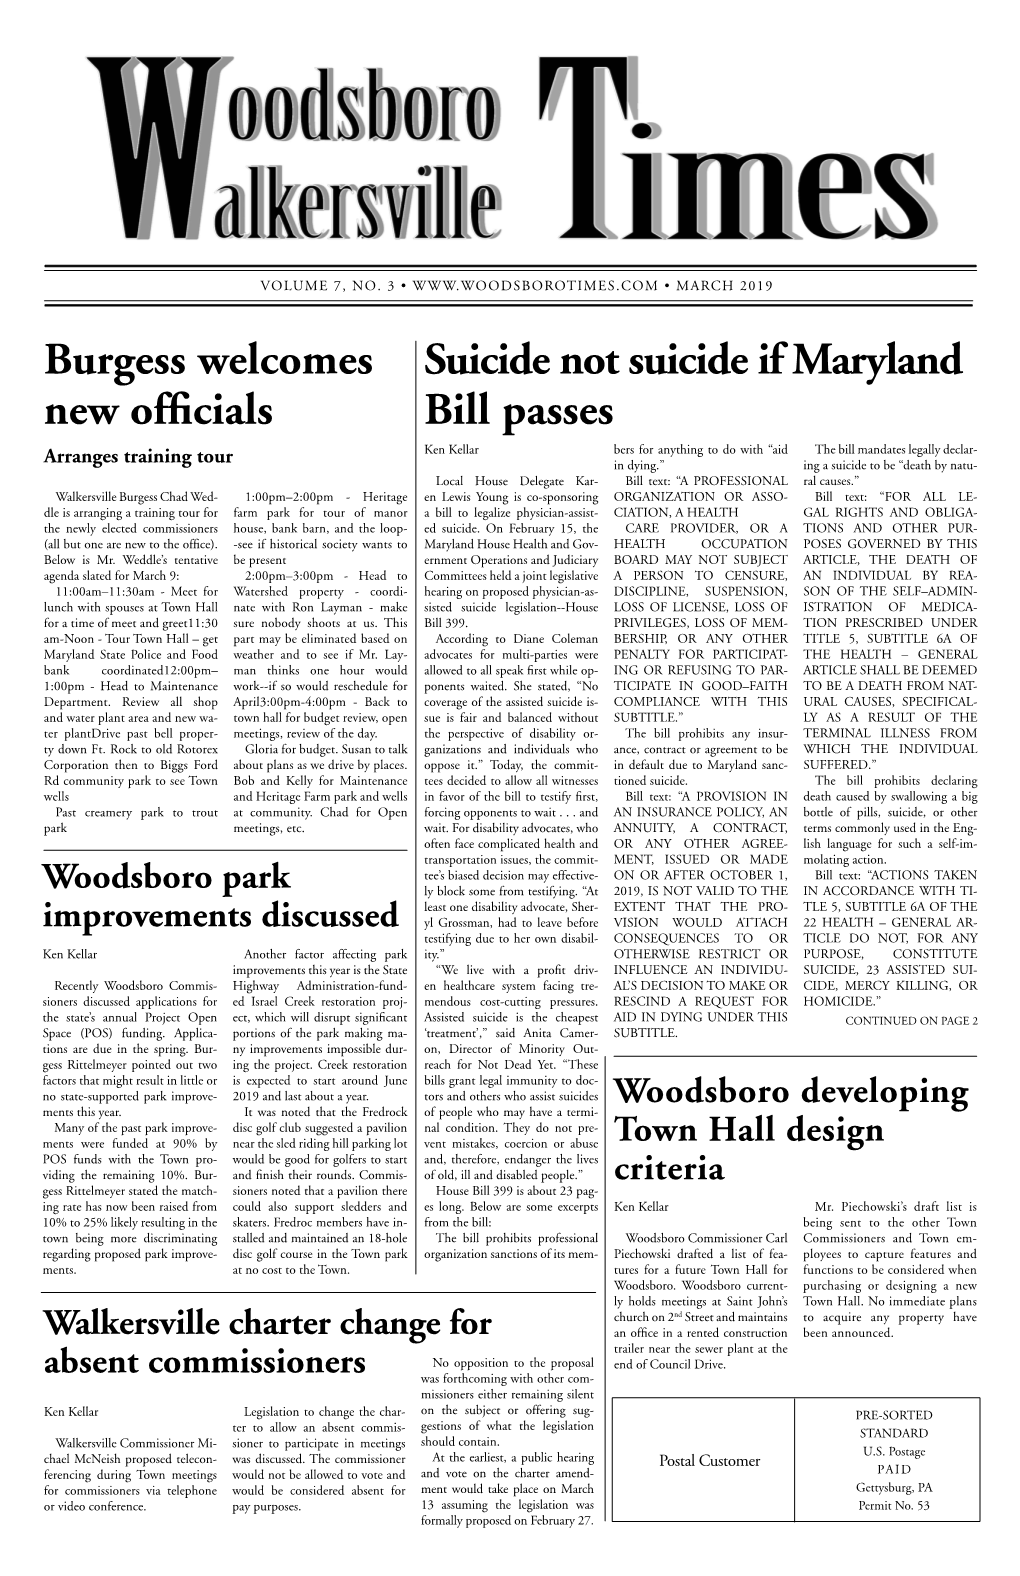 Suicide Not Suicide If Maryland Bill Passes